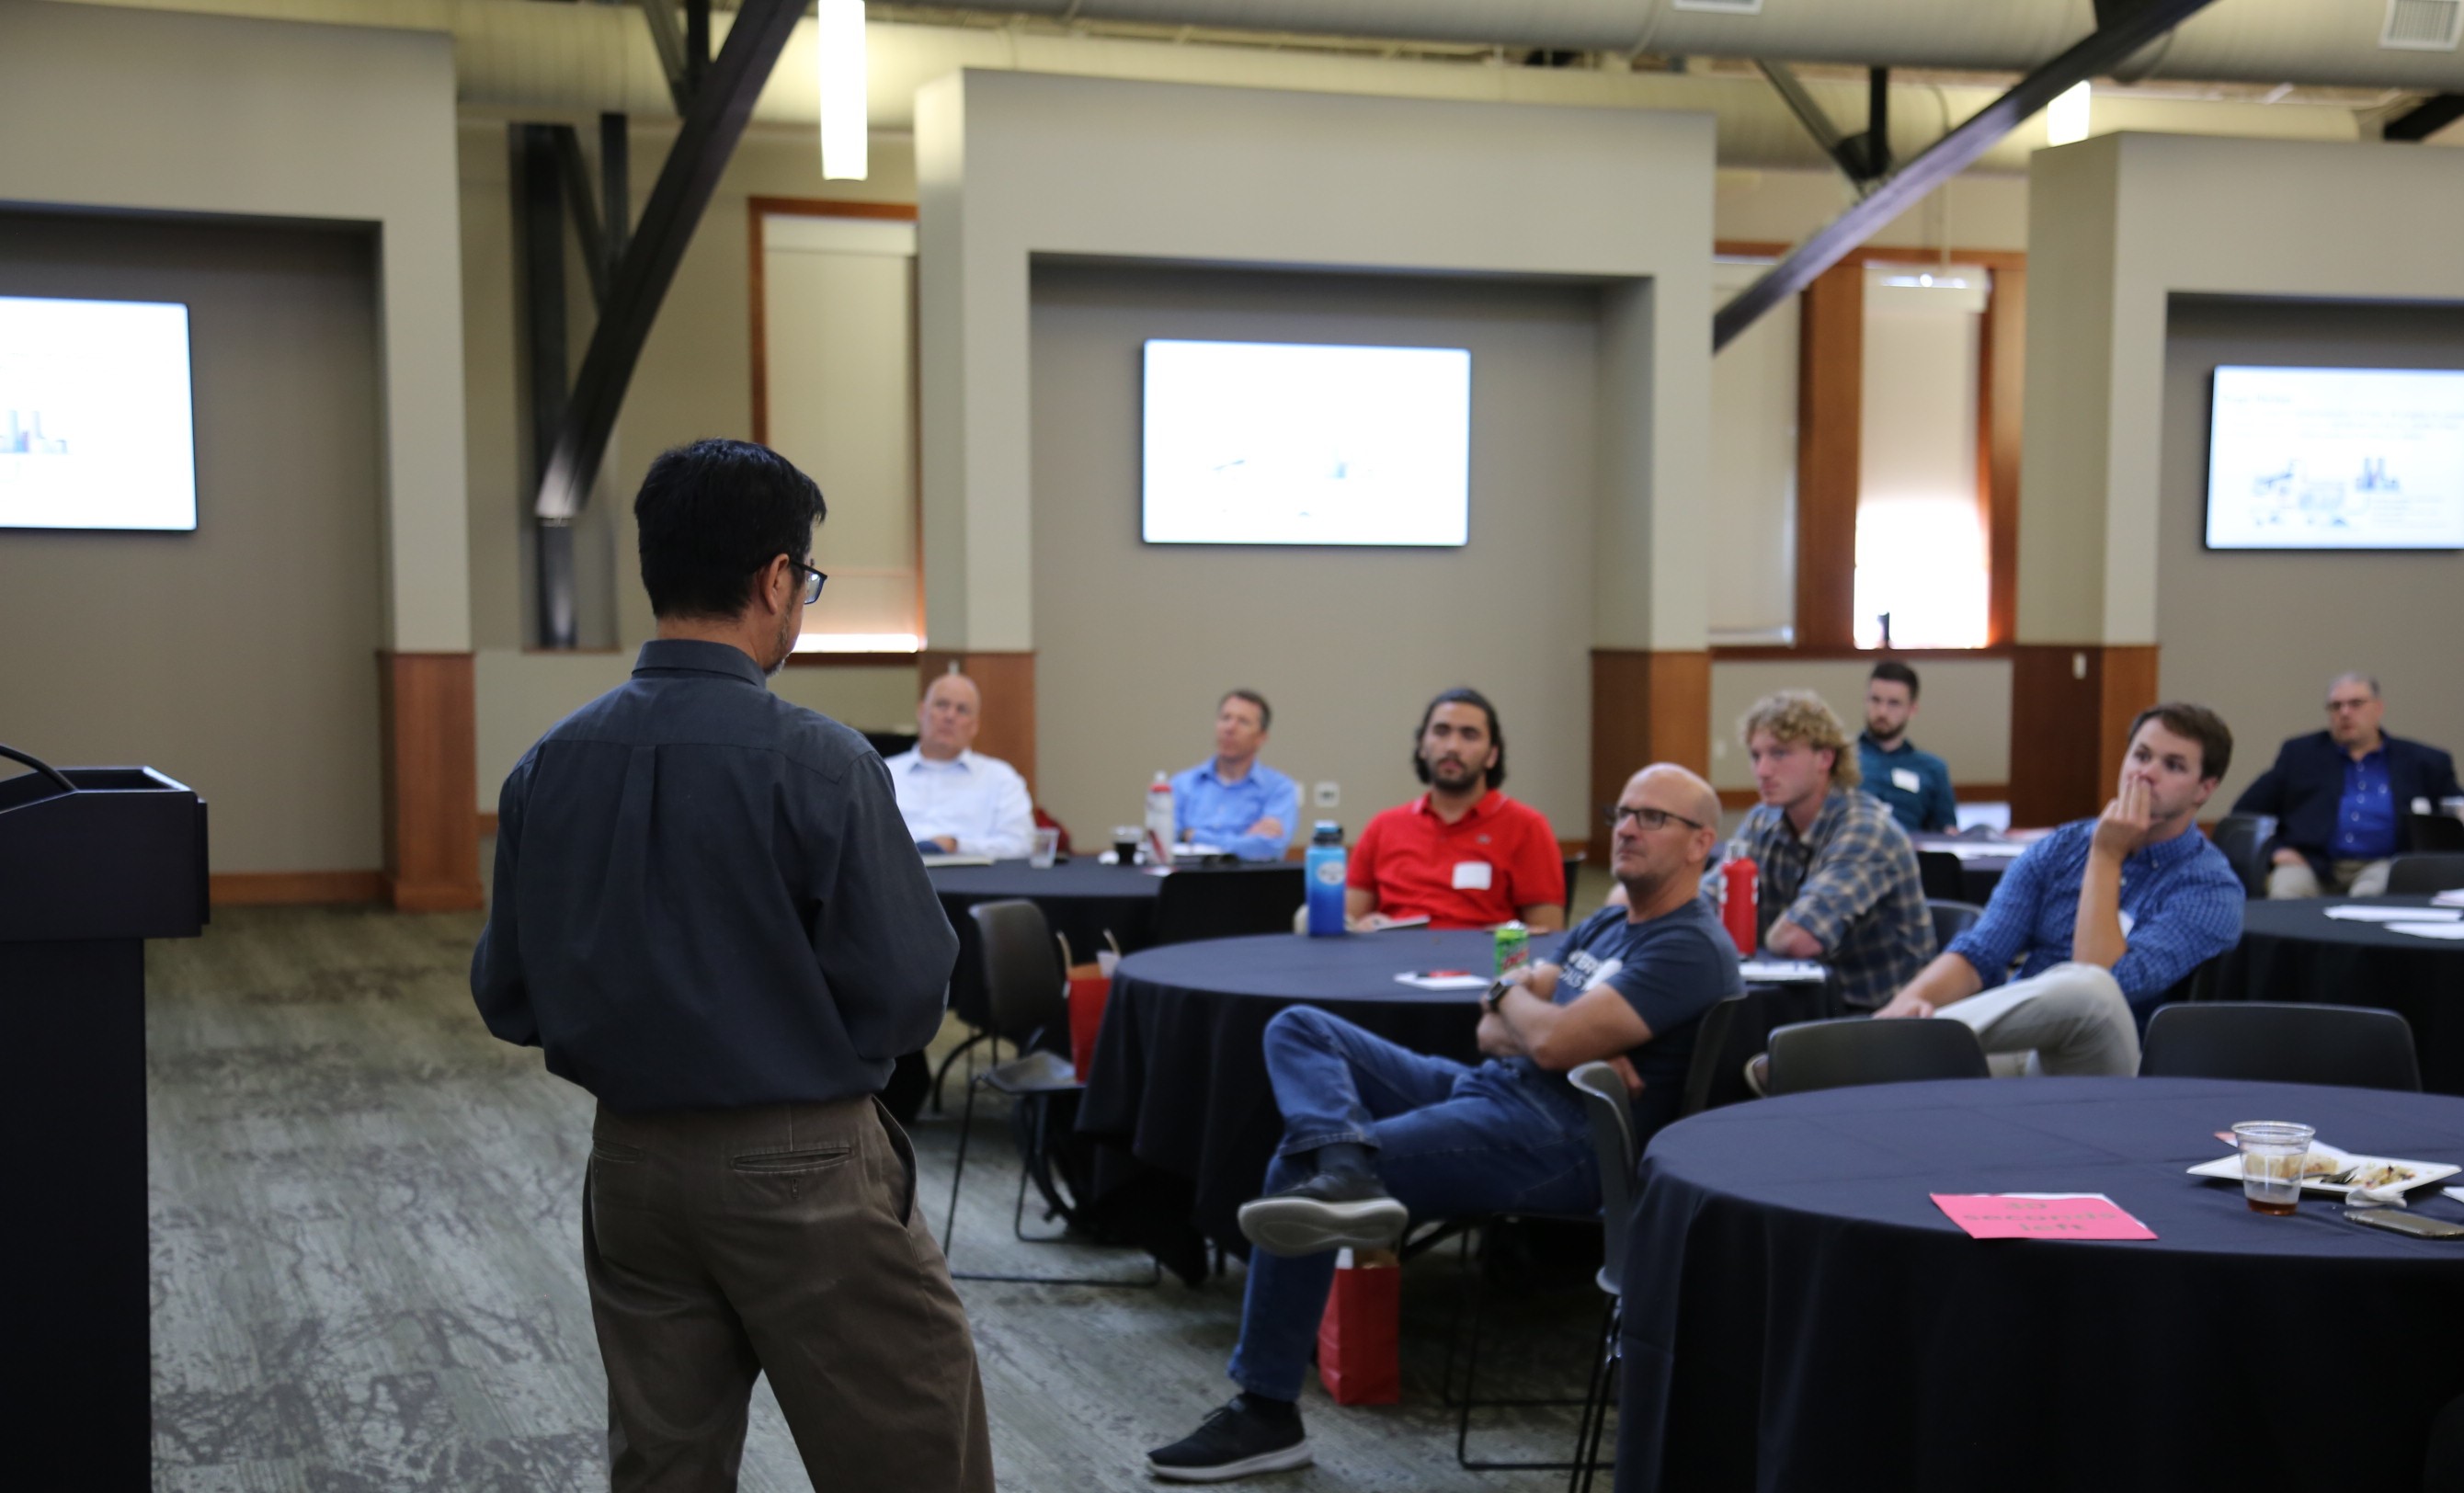 Energy Center hosts workshop to help bring research to market